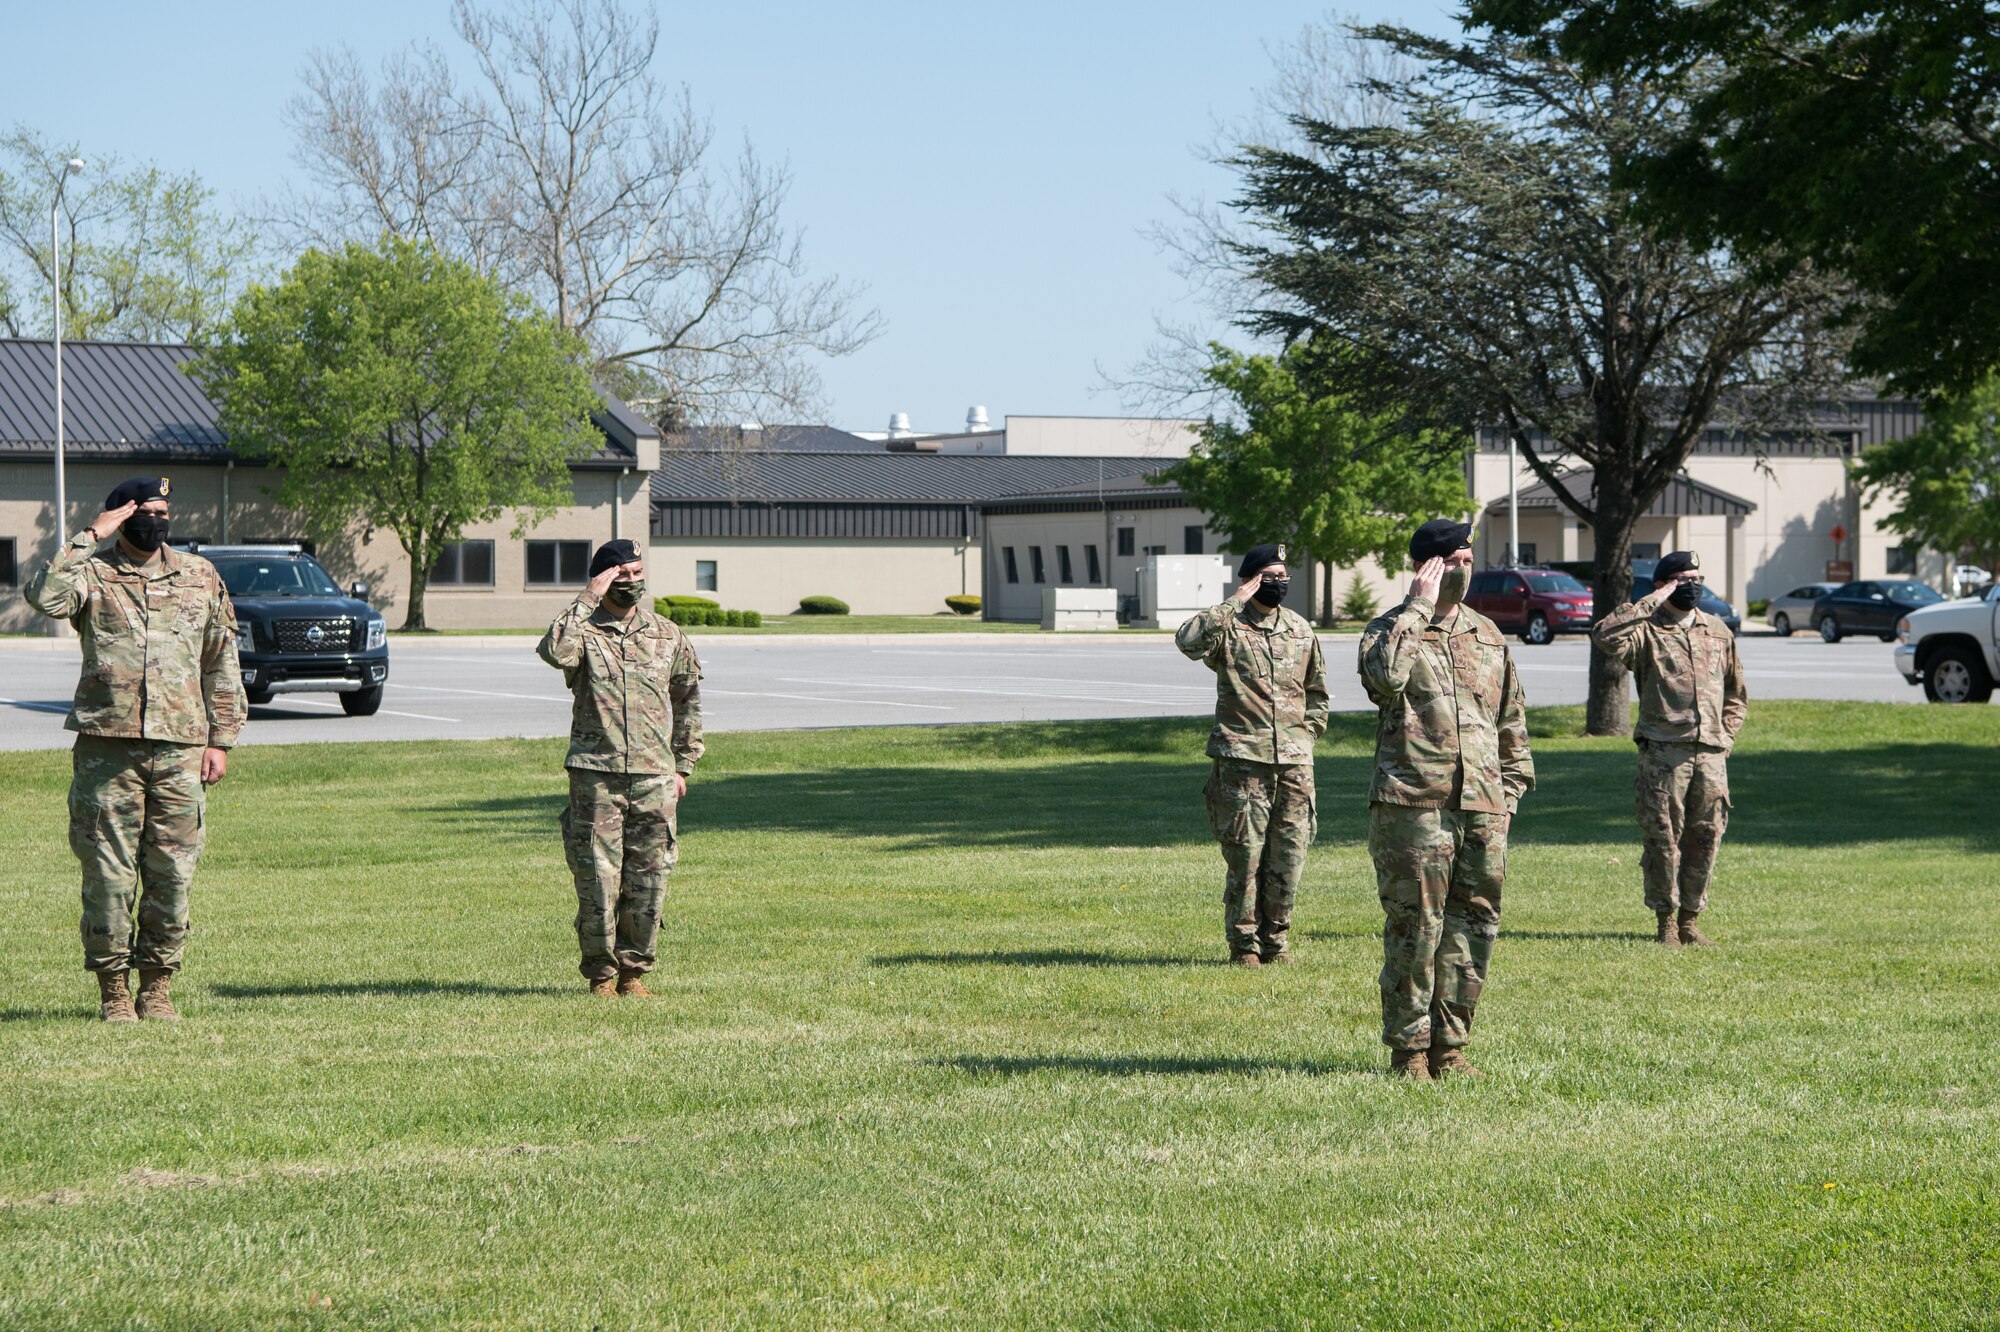 Members of the 436th Security Forces Squadron salute the American flag during a retreat ceremony on Peace Officers Memorial Day May 15, 2020, at Dover Air Force Base, Delaware. Despite the COVID-19 virus, the 436th SFS was able to host the ceremony by limiting the number of participants, practicing social distancing and wearing personal protective equipment. (U.S. Air Force photo by Mauricio Campino)